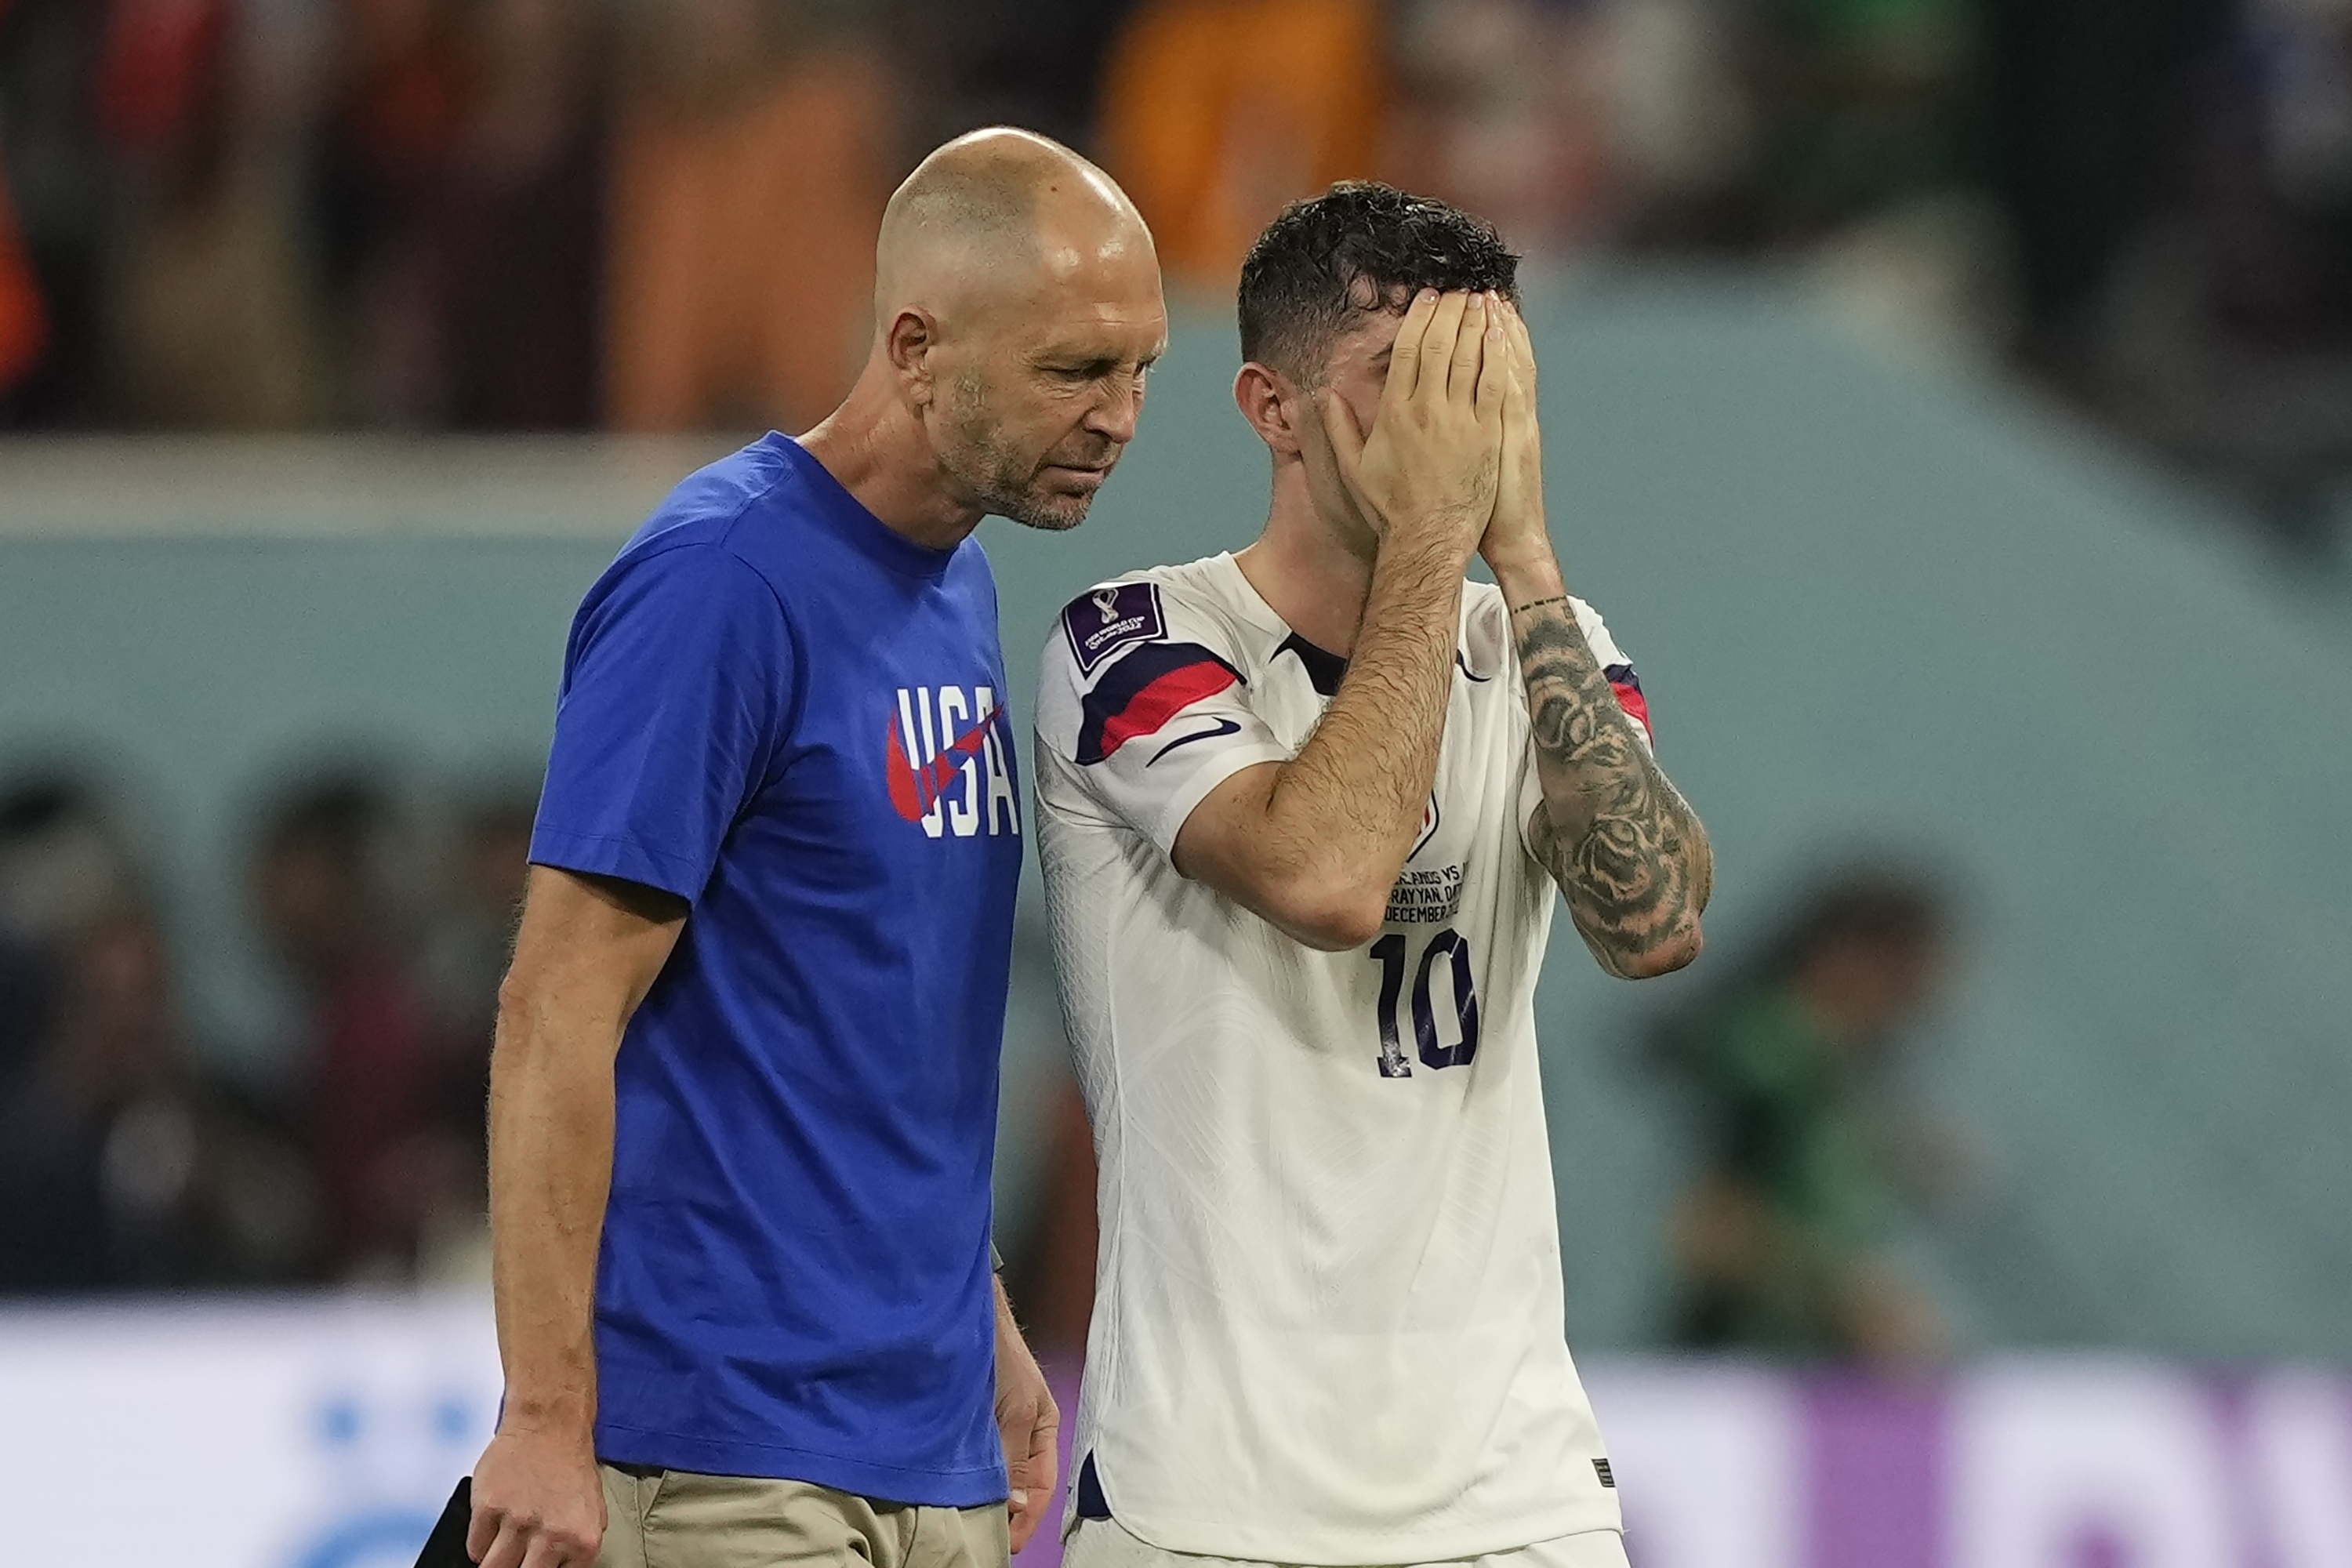 American soccer success in World Cup remains a dream unfulfilled